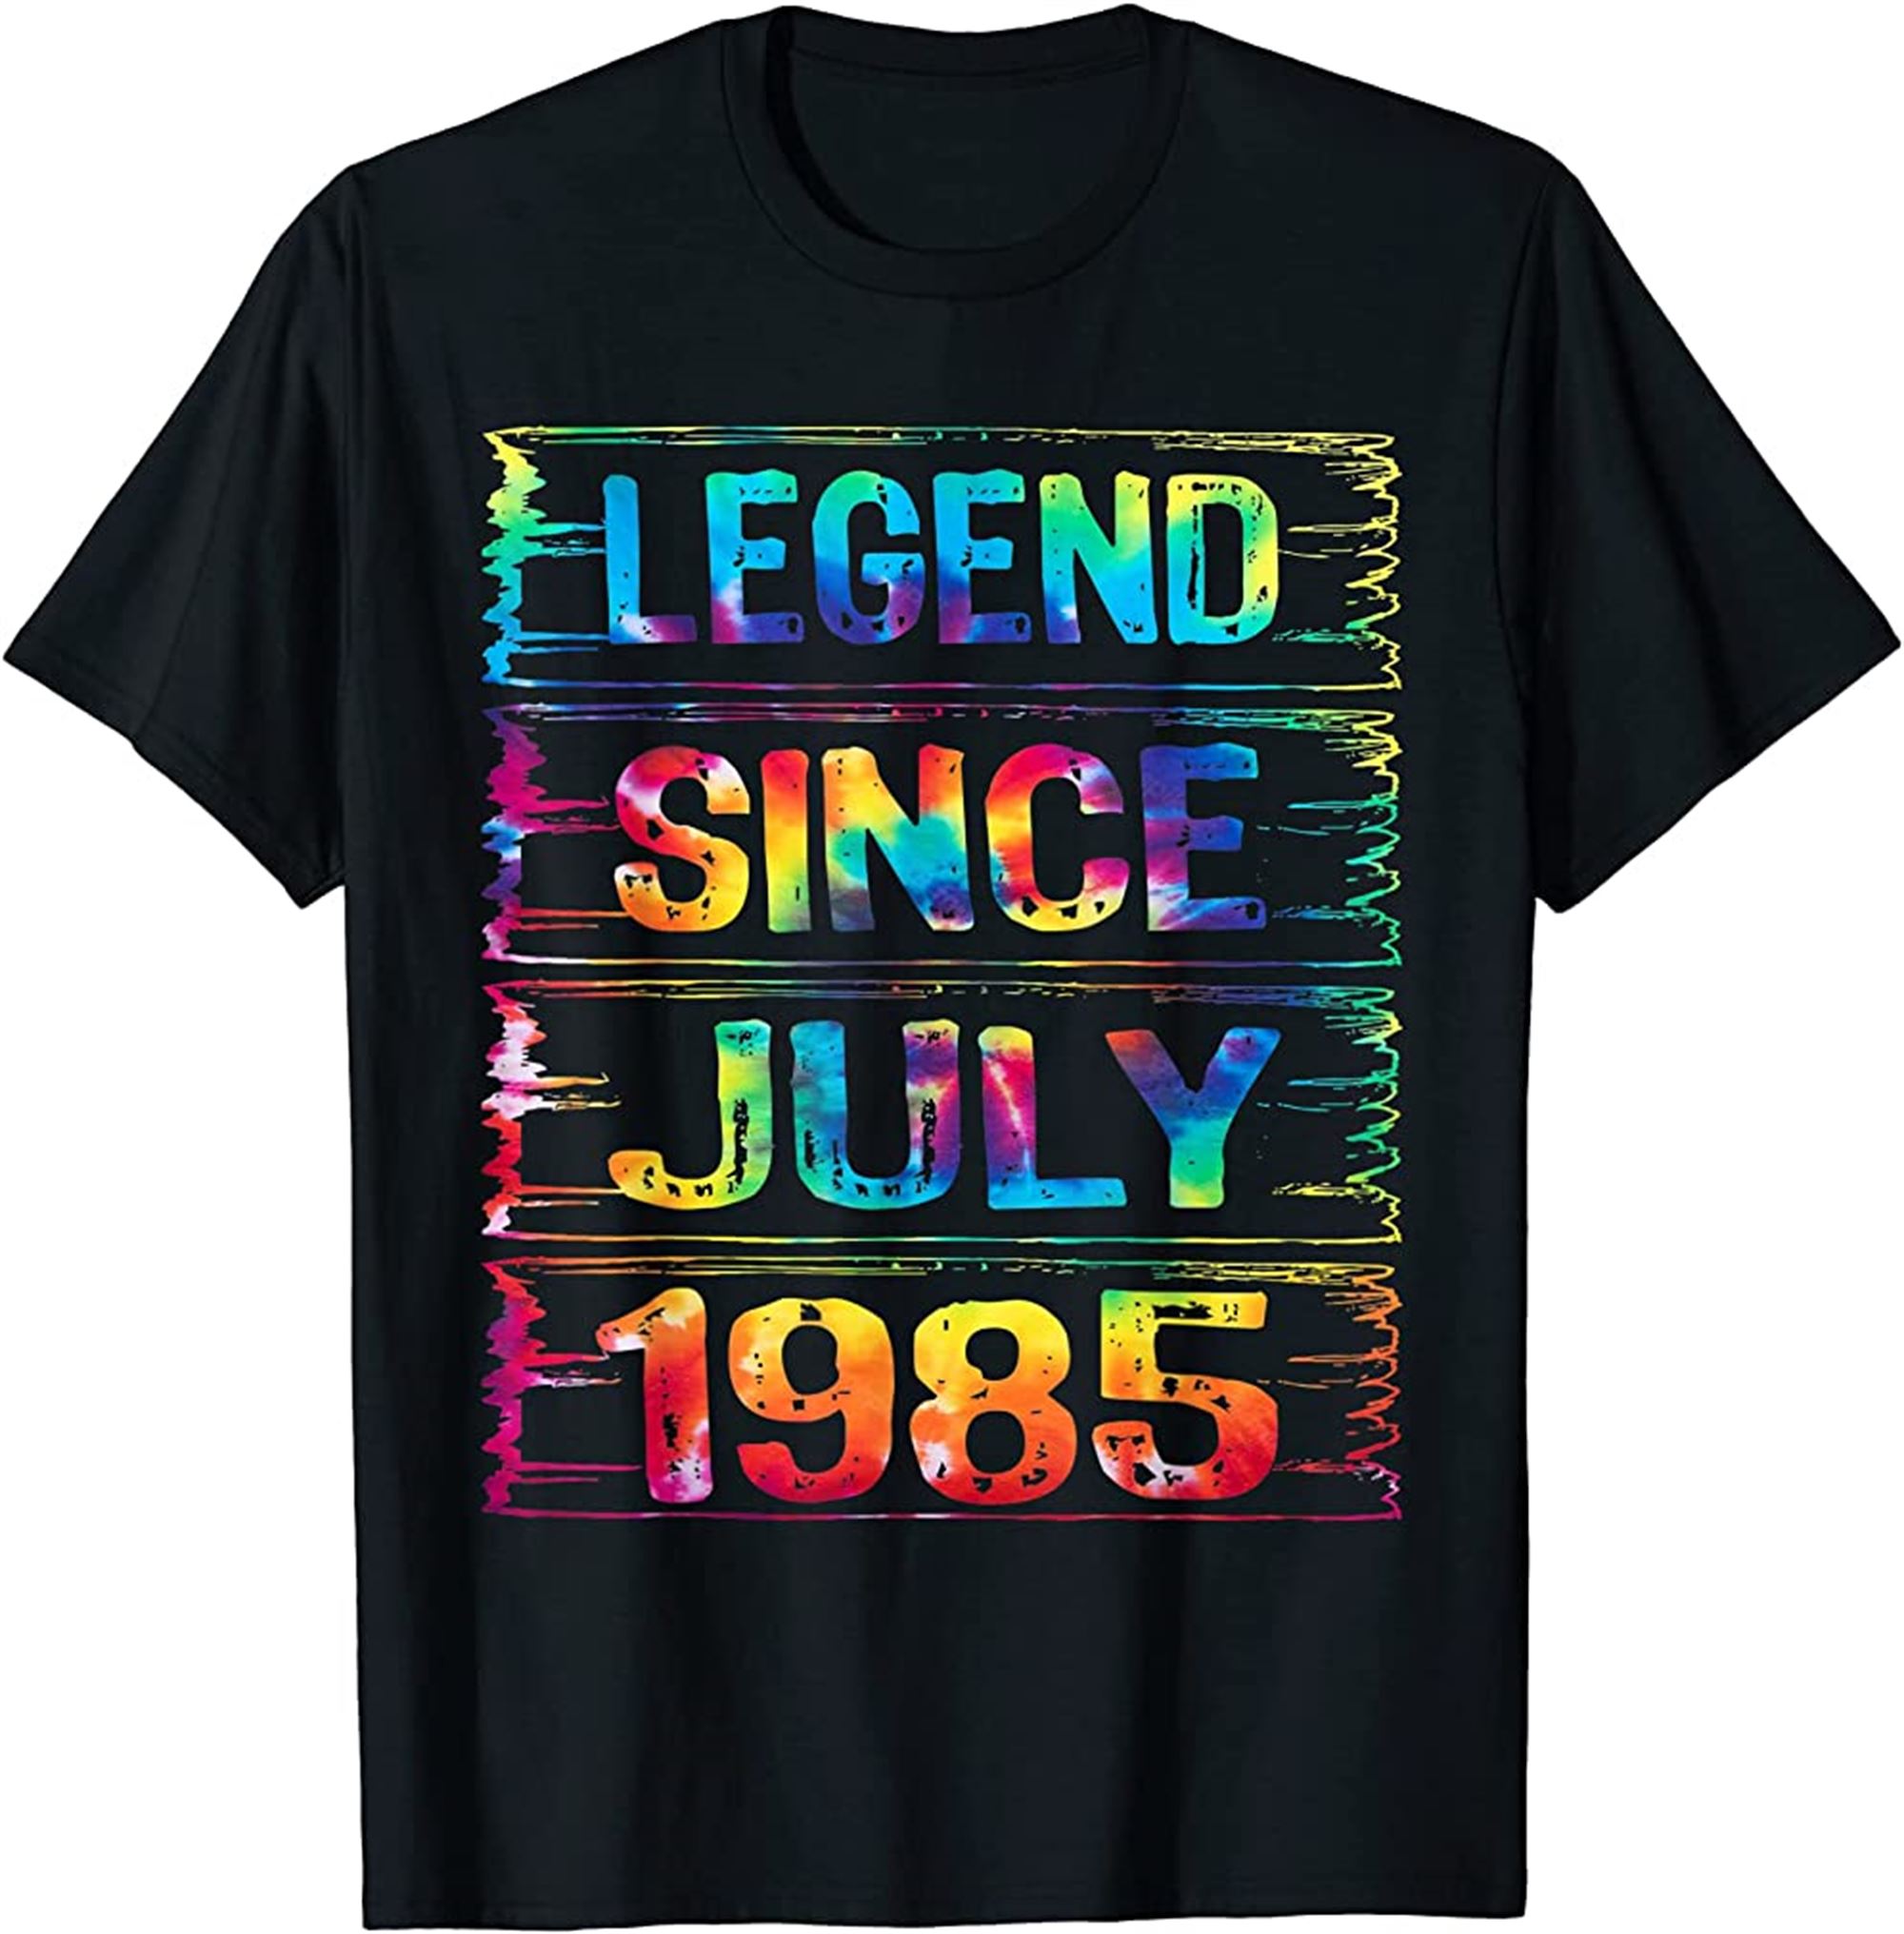 July 37 Years Old Since 1985 37th Birthday Gifts Tie Dye T-shirt Plus Size Up To 5xl